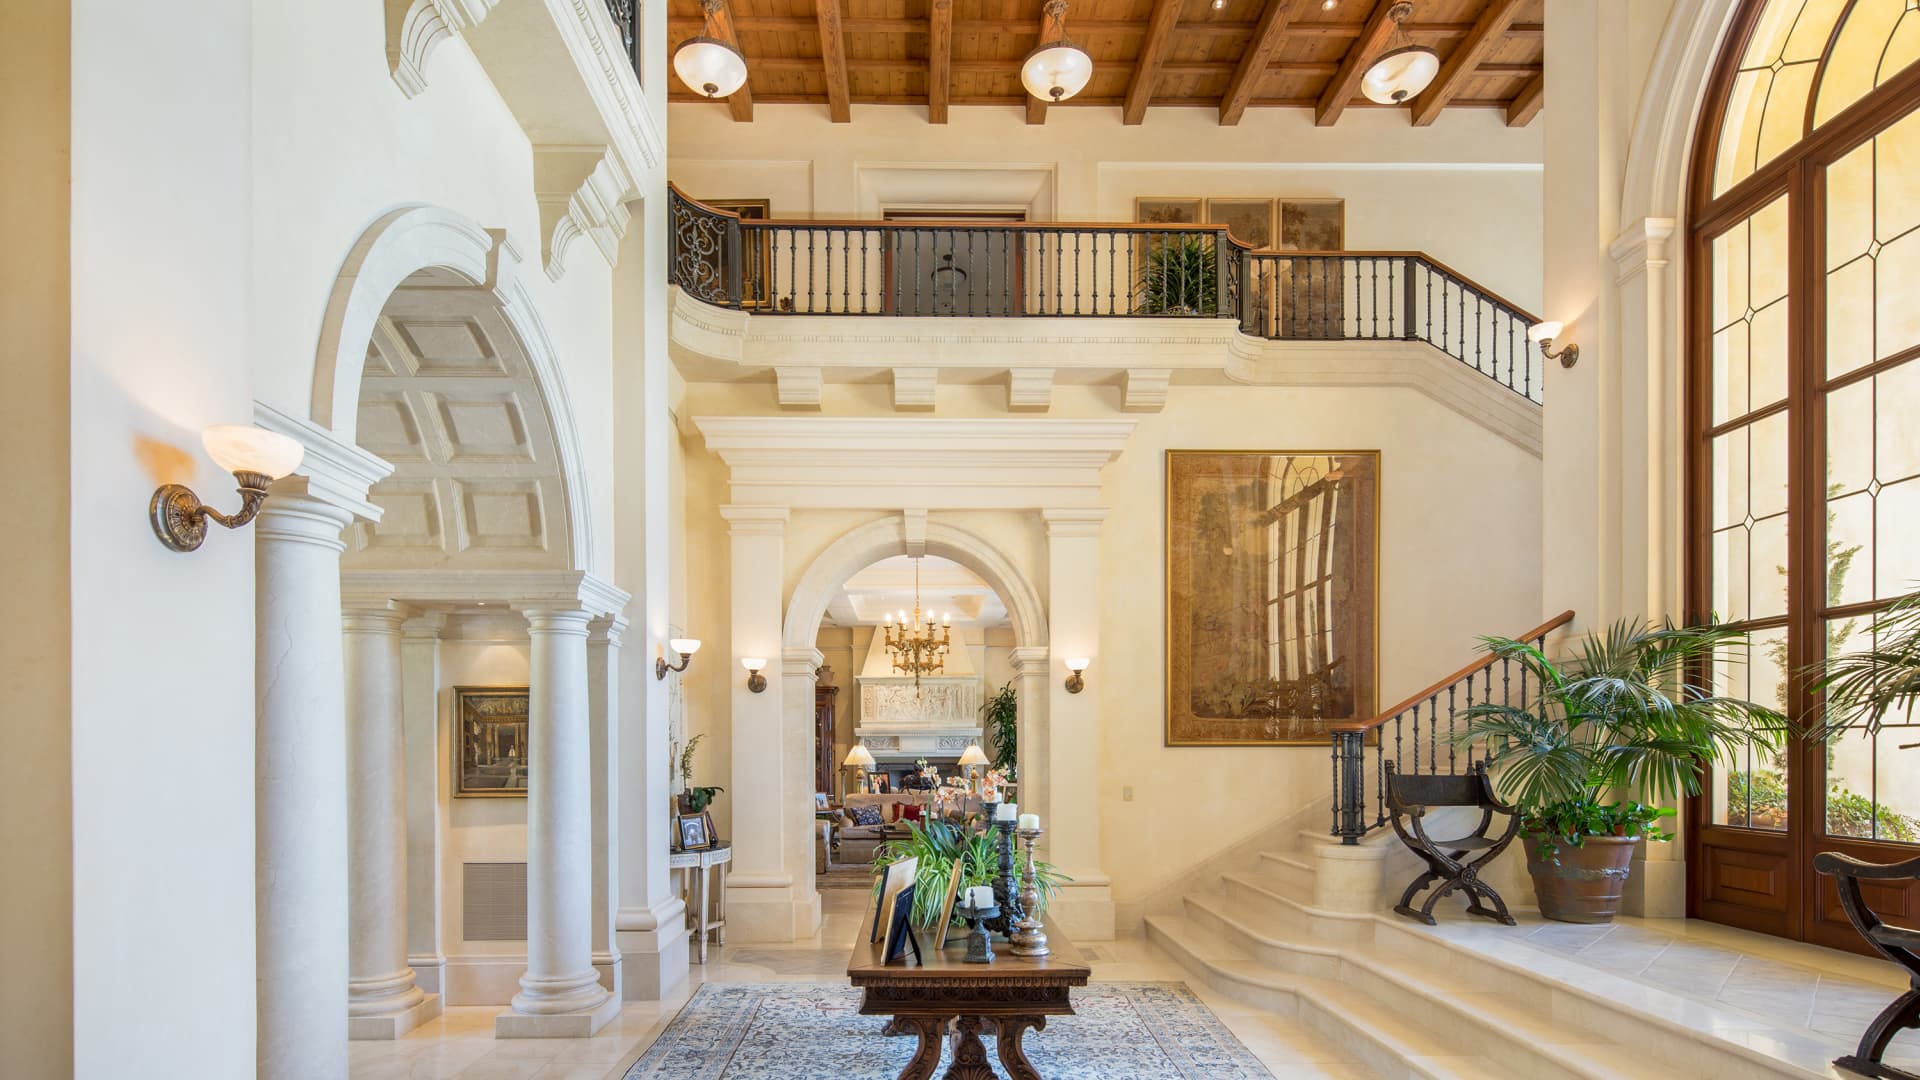 With vaulted ceilings and marble arches, Villa Firenze is reminiscent of an Italian villa.